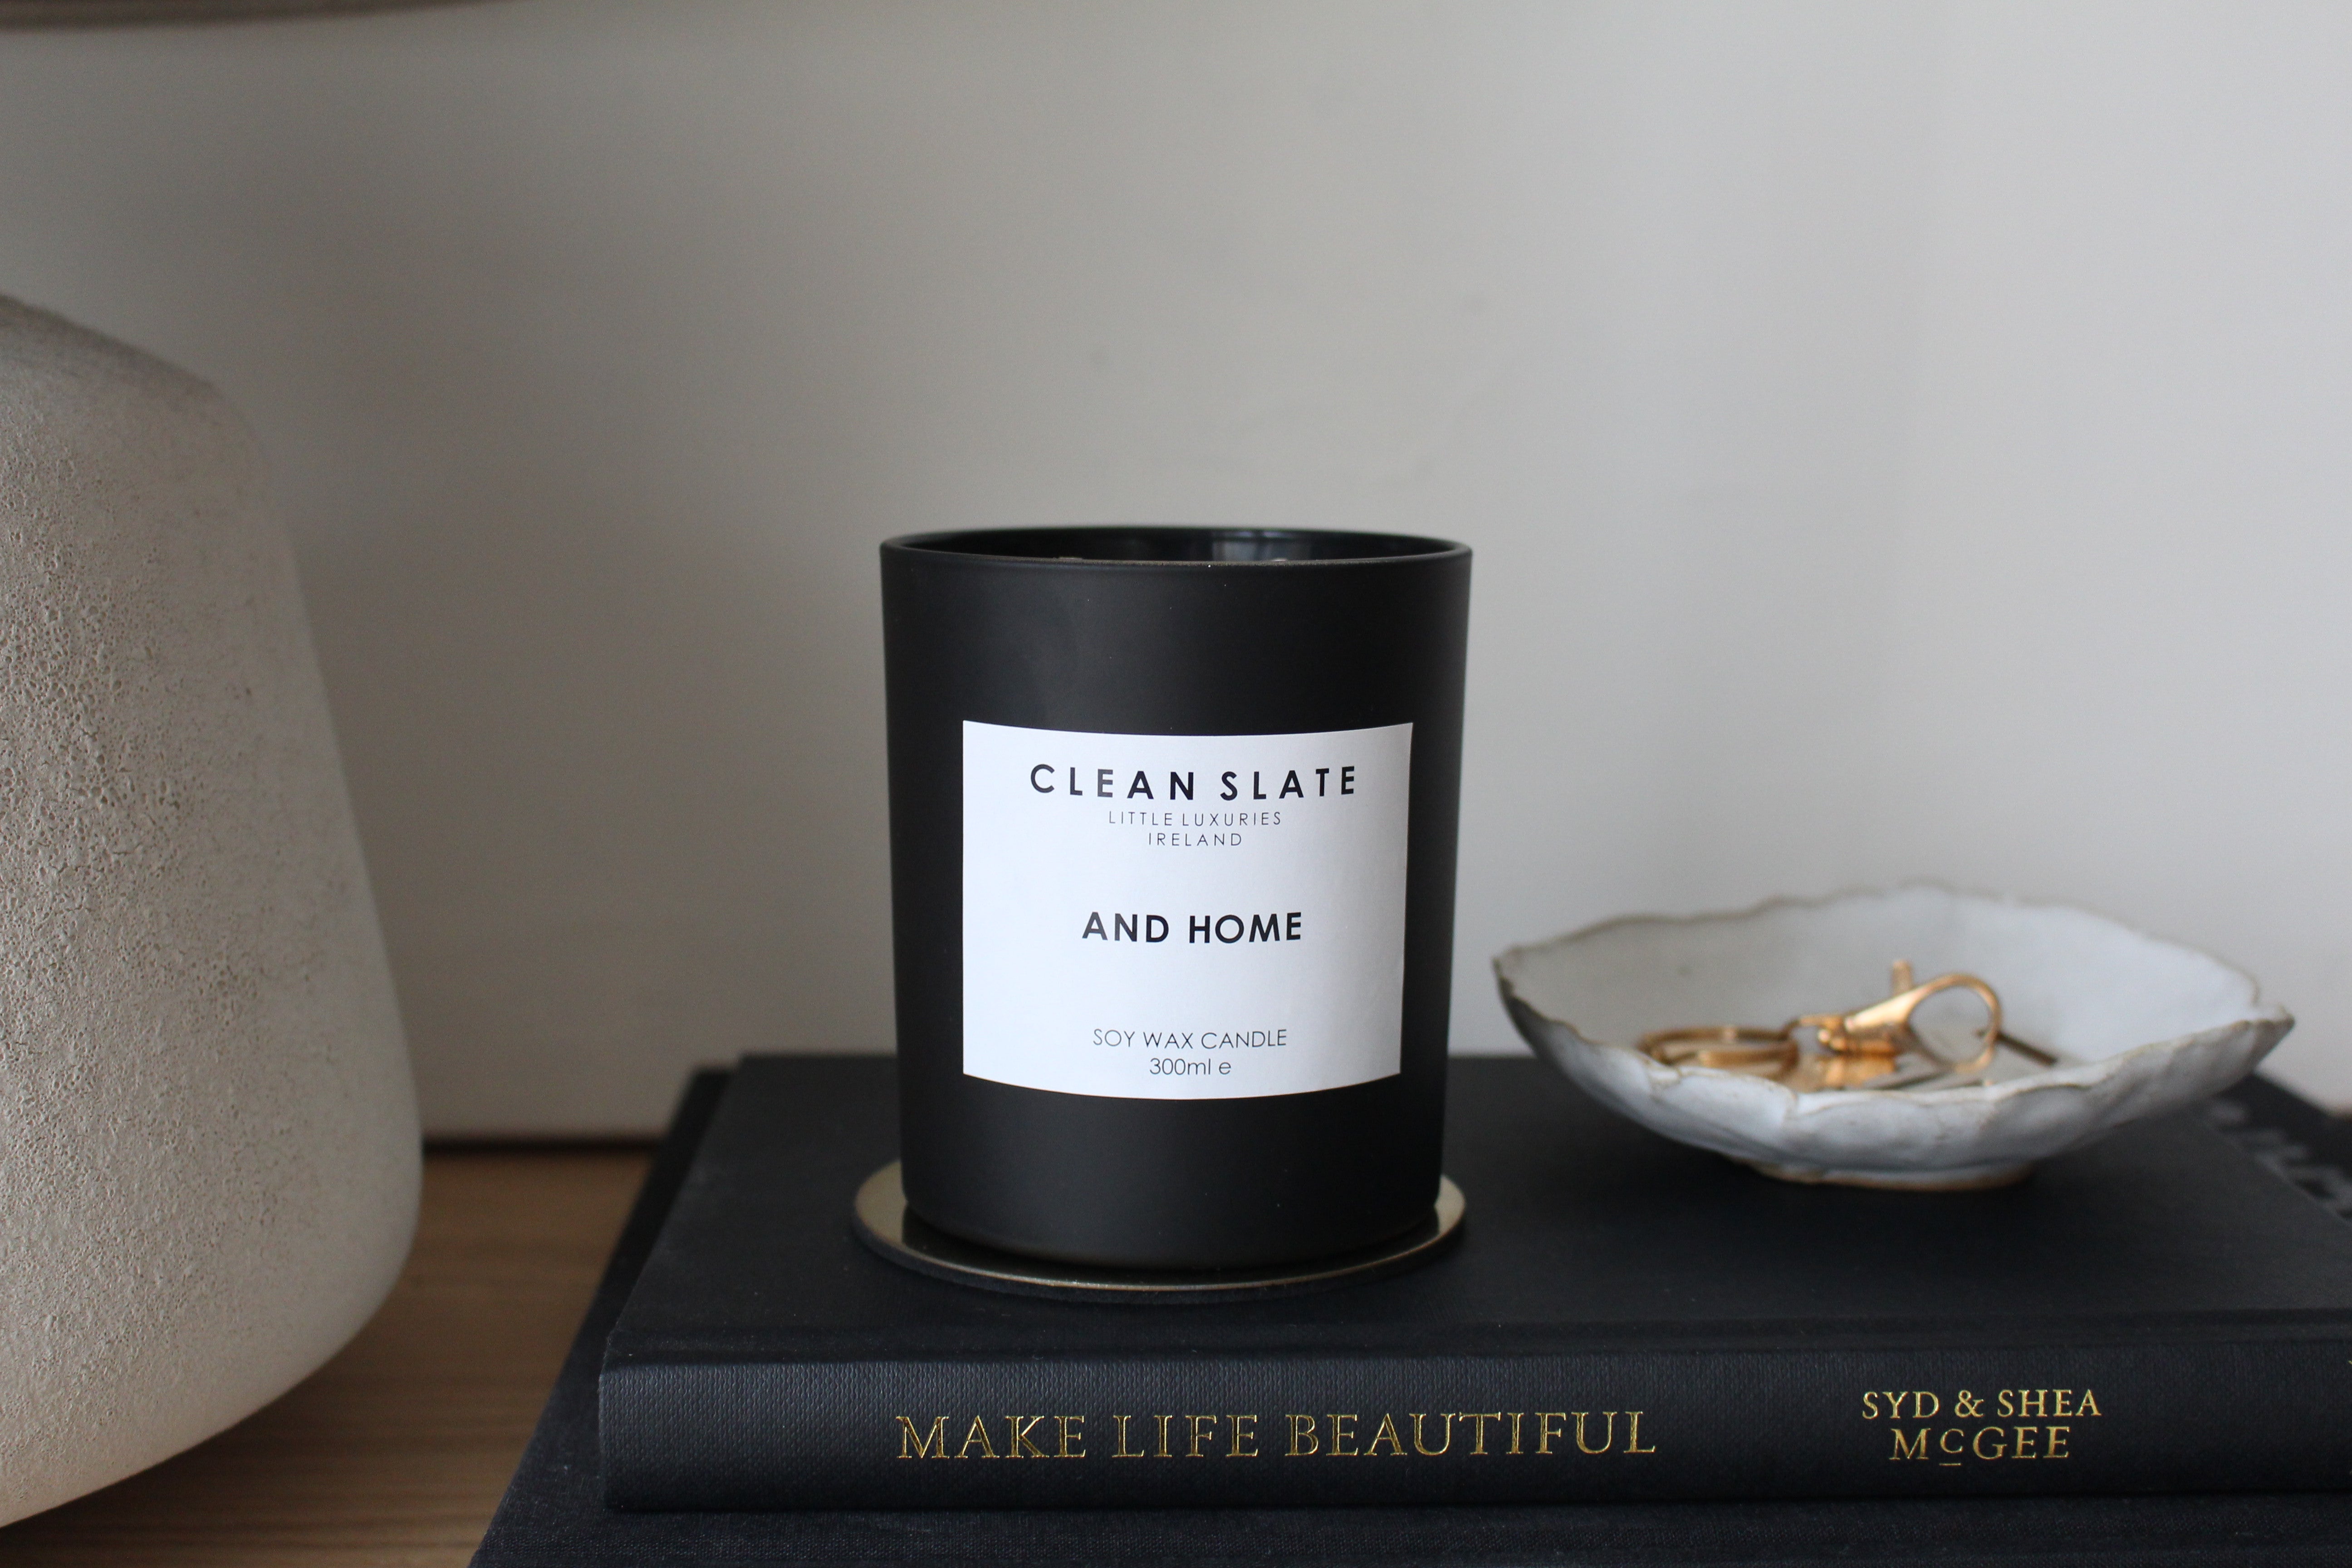 And Home Noir Candle styled.